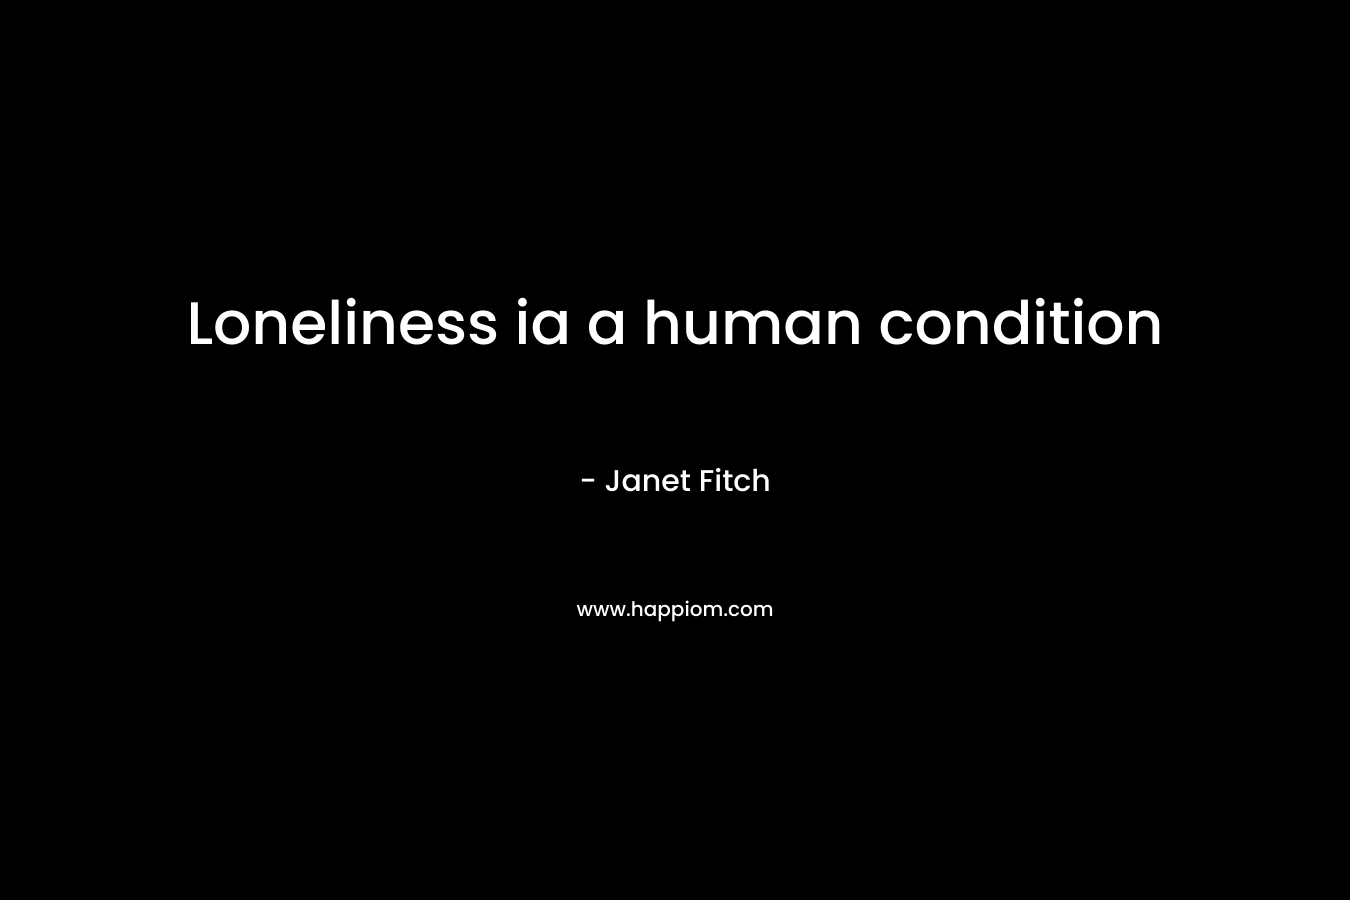 Loneliness ia a human condition